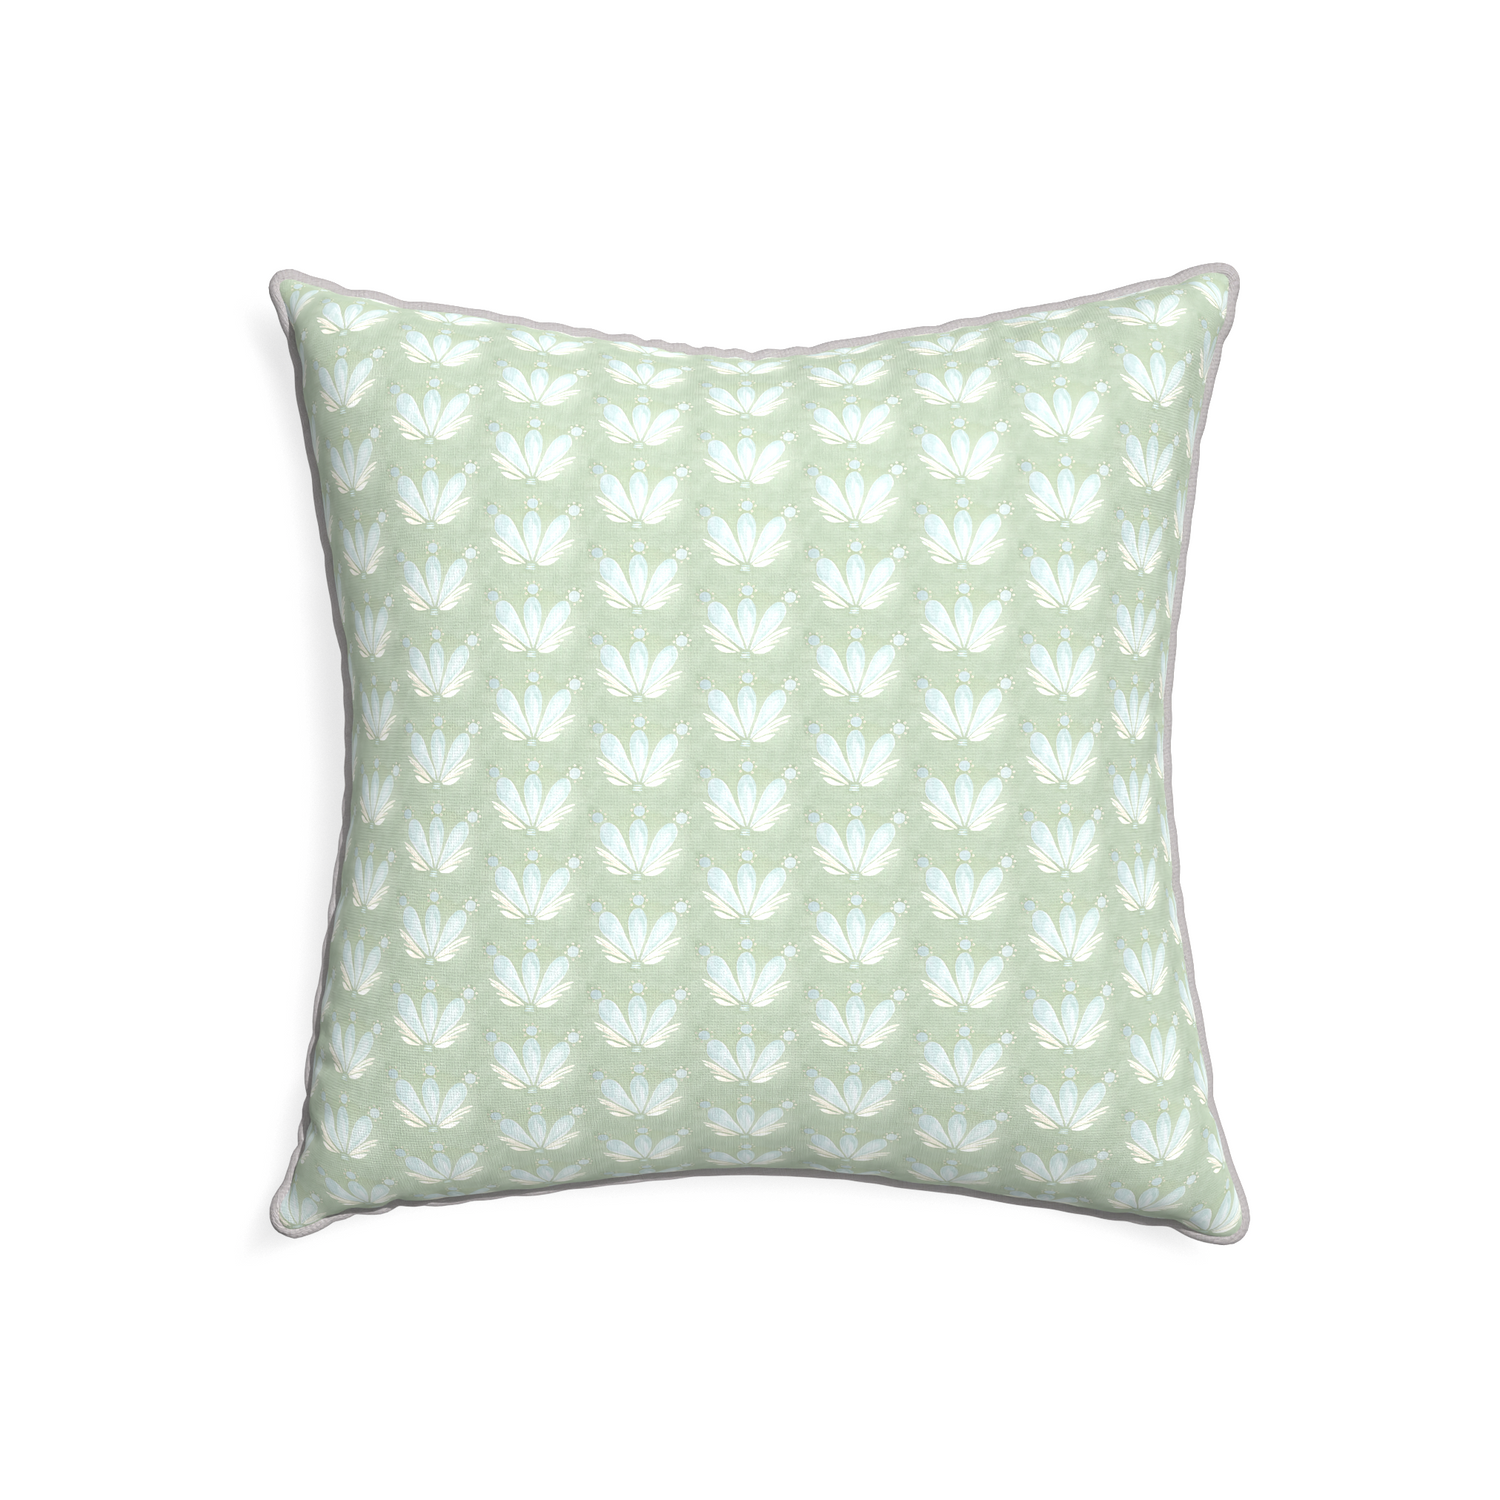 22-square serena sea salt custom blue & green floral drop repeatpillow with pebble piping on white background